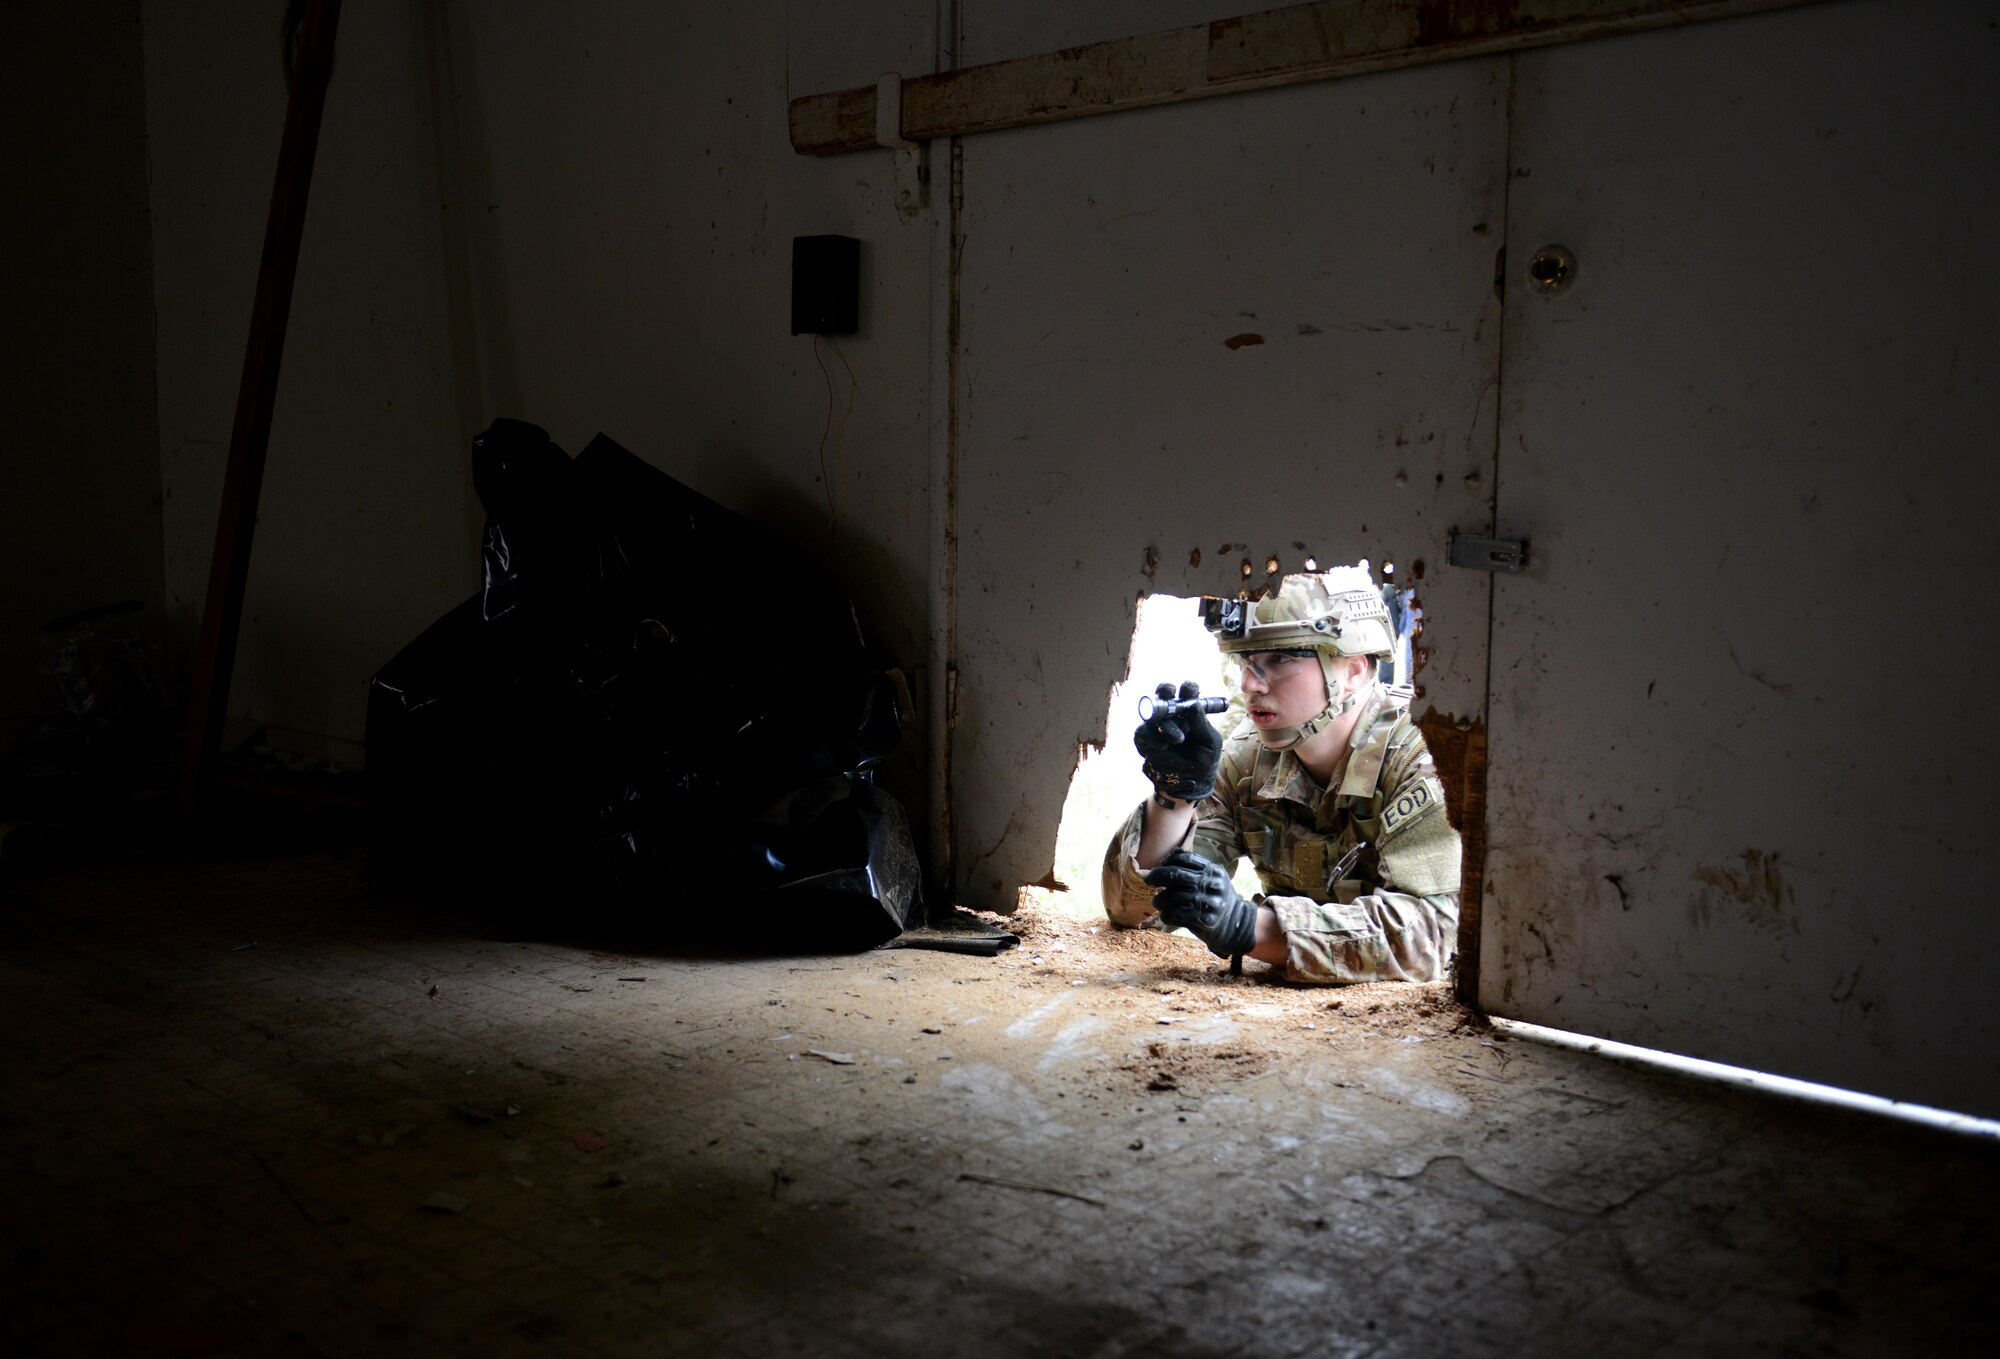 Airman 1st Class Alex Nona, 60th Civil Engineer Squadron explosive ordnance disposal technician, inspects the interior of an abandoned structure known as the “bomb factory” prior to entry during an exercise May 5th, 2016, at Clear Lake, California. Nona and other EOD technicians were tasked to eliminate numerous improvised explosive devices and a radioactive dispersal device within the abandoned structure. (U.S. Air Force photo by Senior Airman Bobby Cummings)